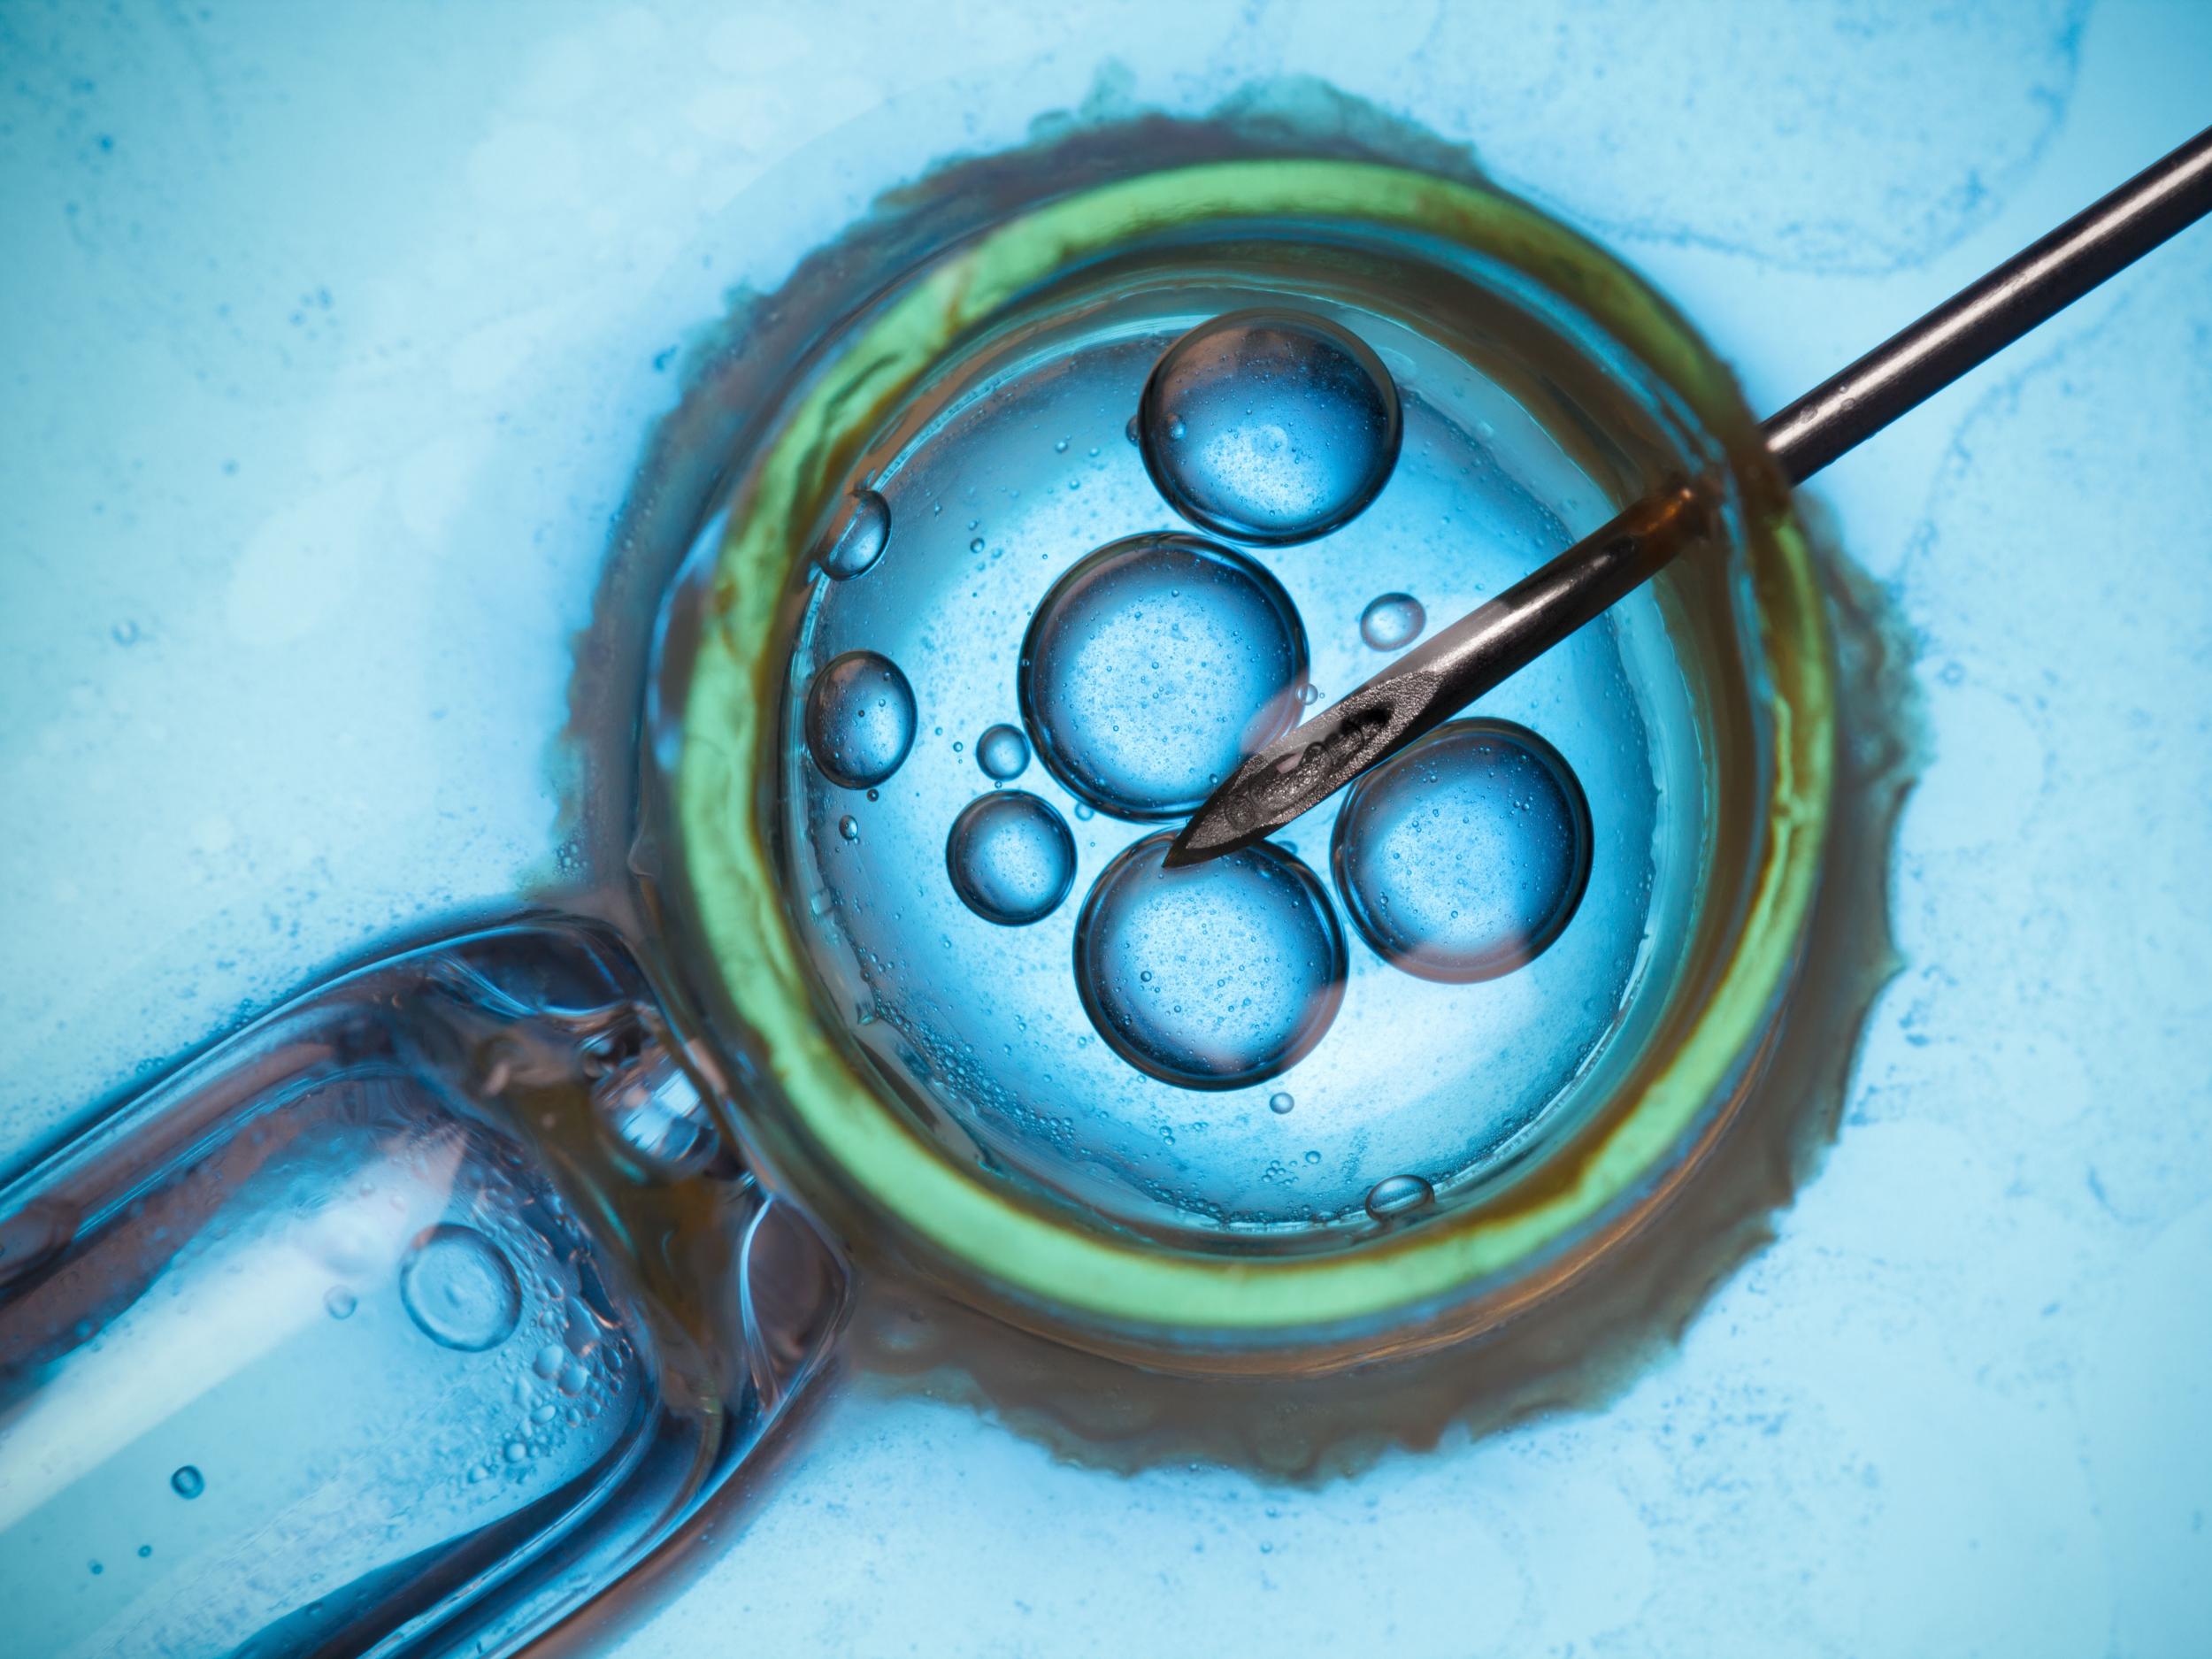 IVF add-on therapies often marketed to would-be parents with little evidence of their benefits